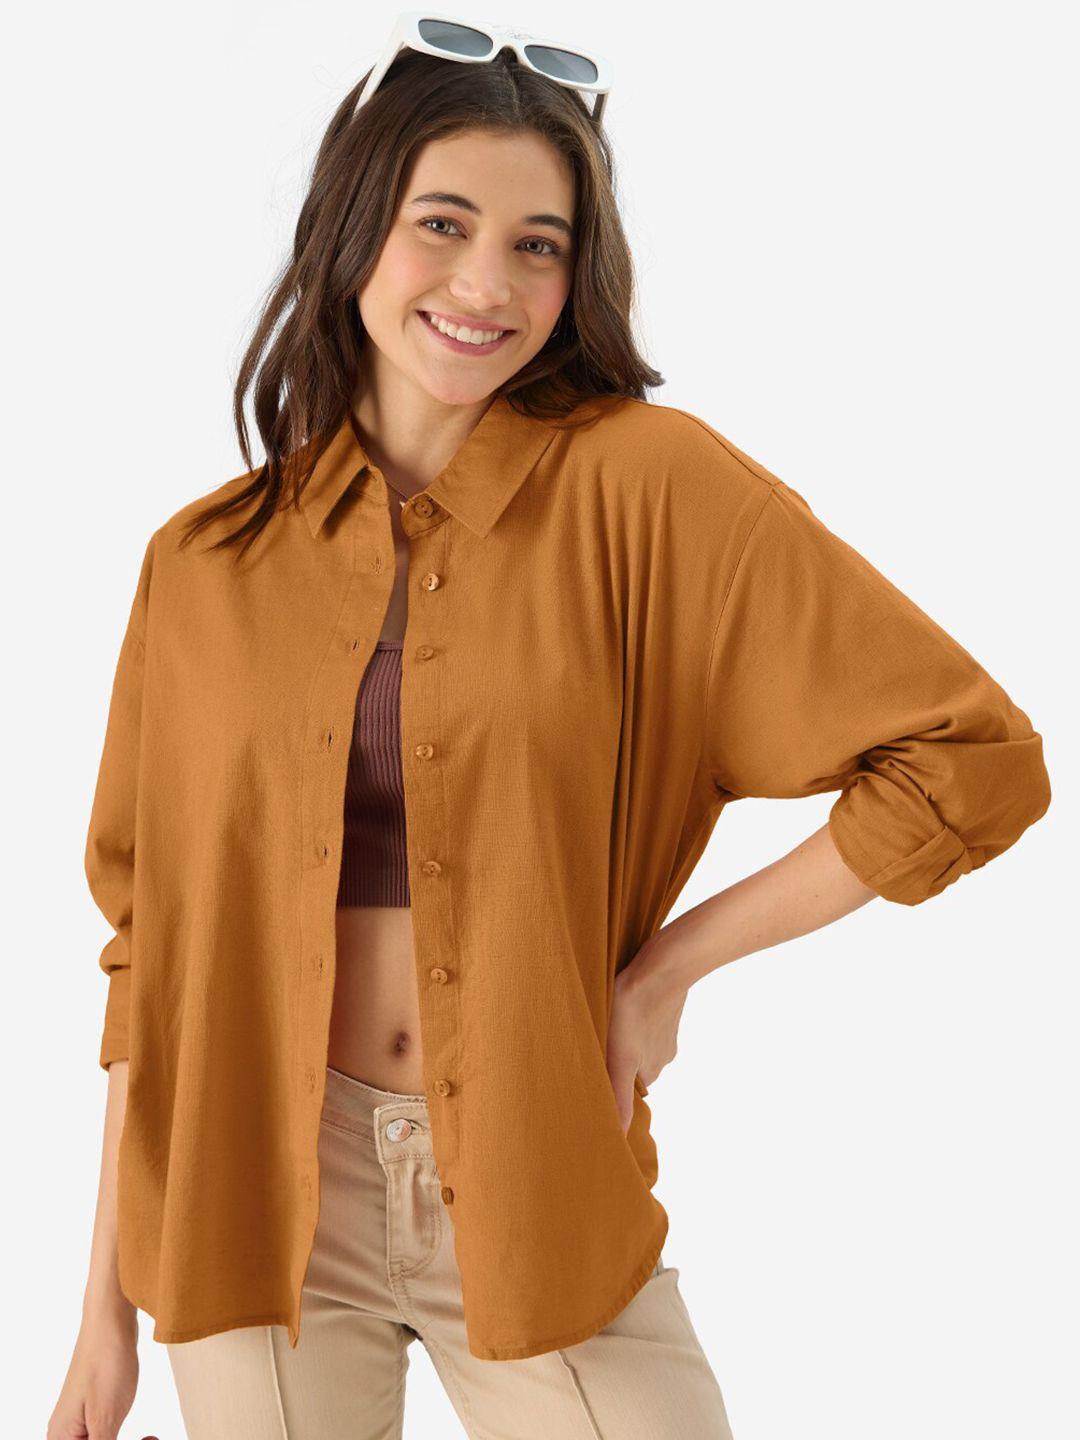 the souled store women rust opaque casual shirt